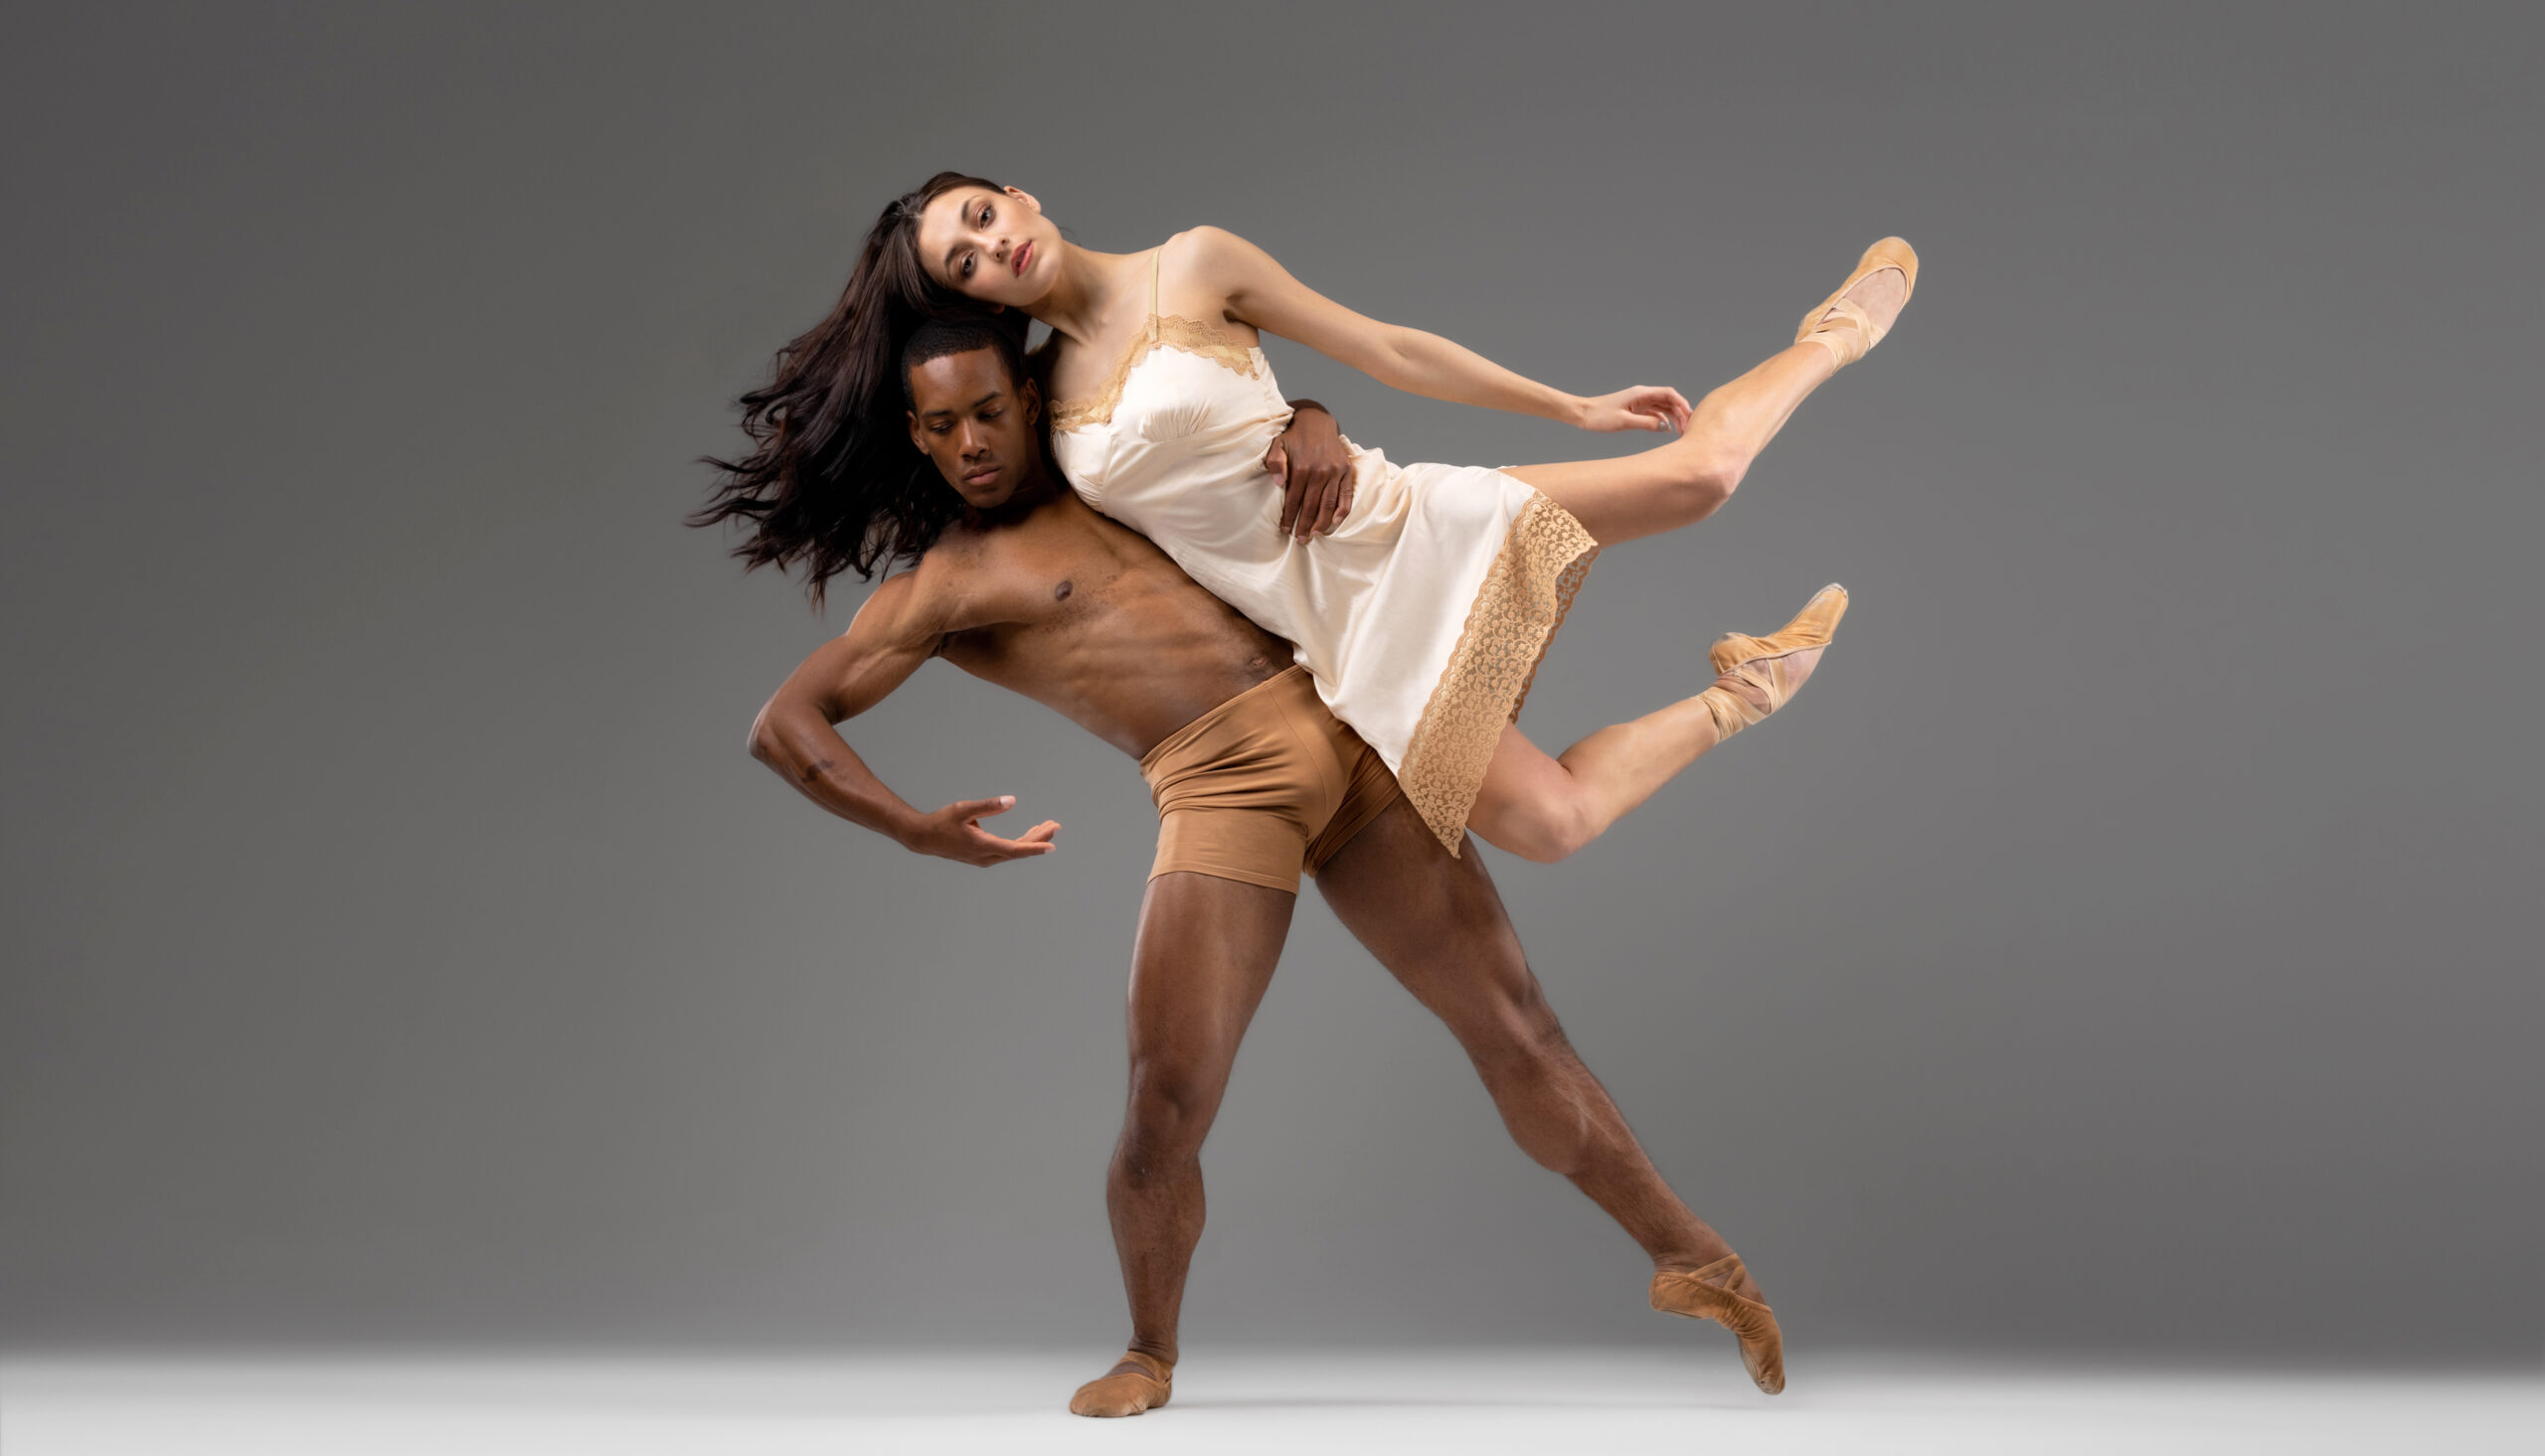 In front of a gray backdrop, a male dancer lifts a female dancer on the side of his body. She bends her legs in attitude, her hip in line with his as her legs reach on the upward diagonal. He lunges in tendu a la seconde with a stylized arm position, wrapping his left around her waist for support and mimicking the same shape with his right.